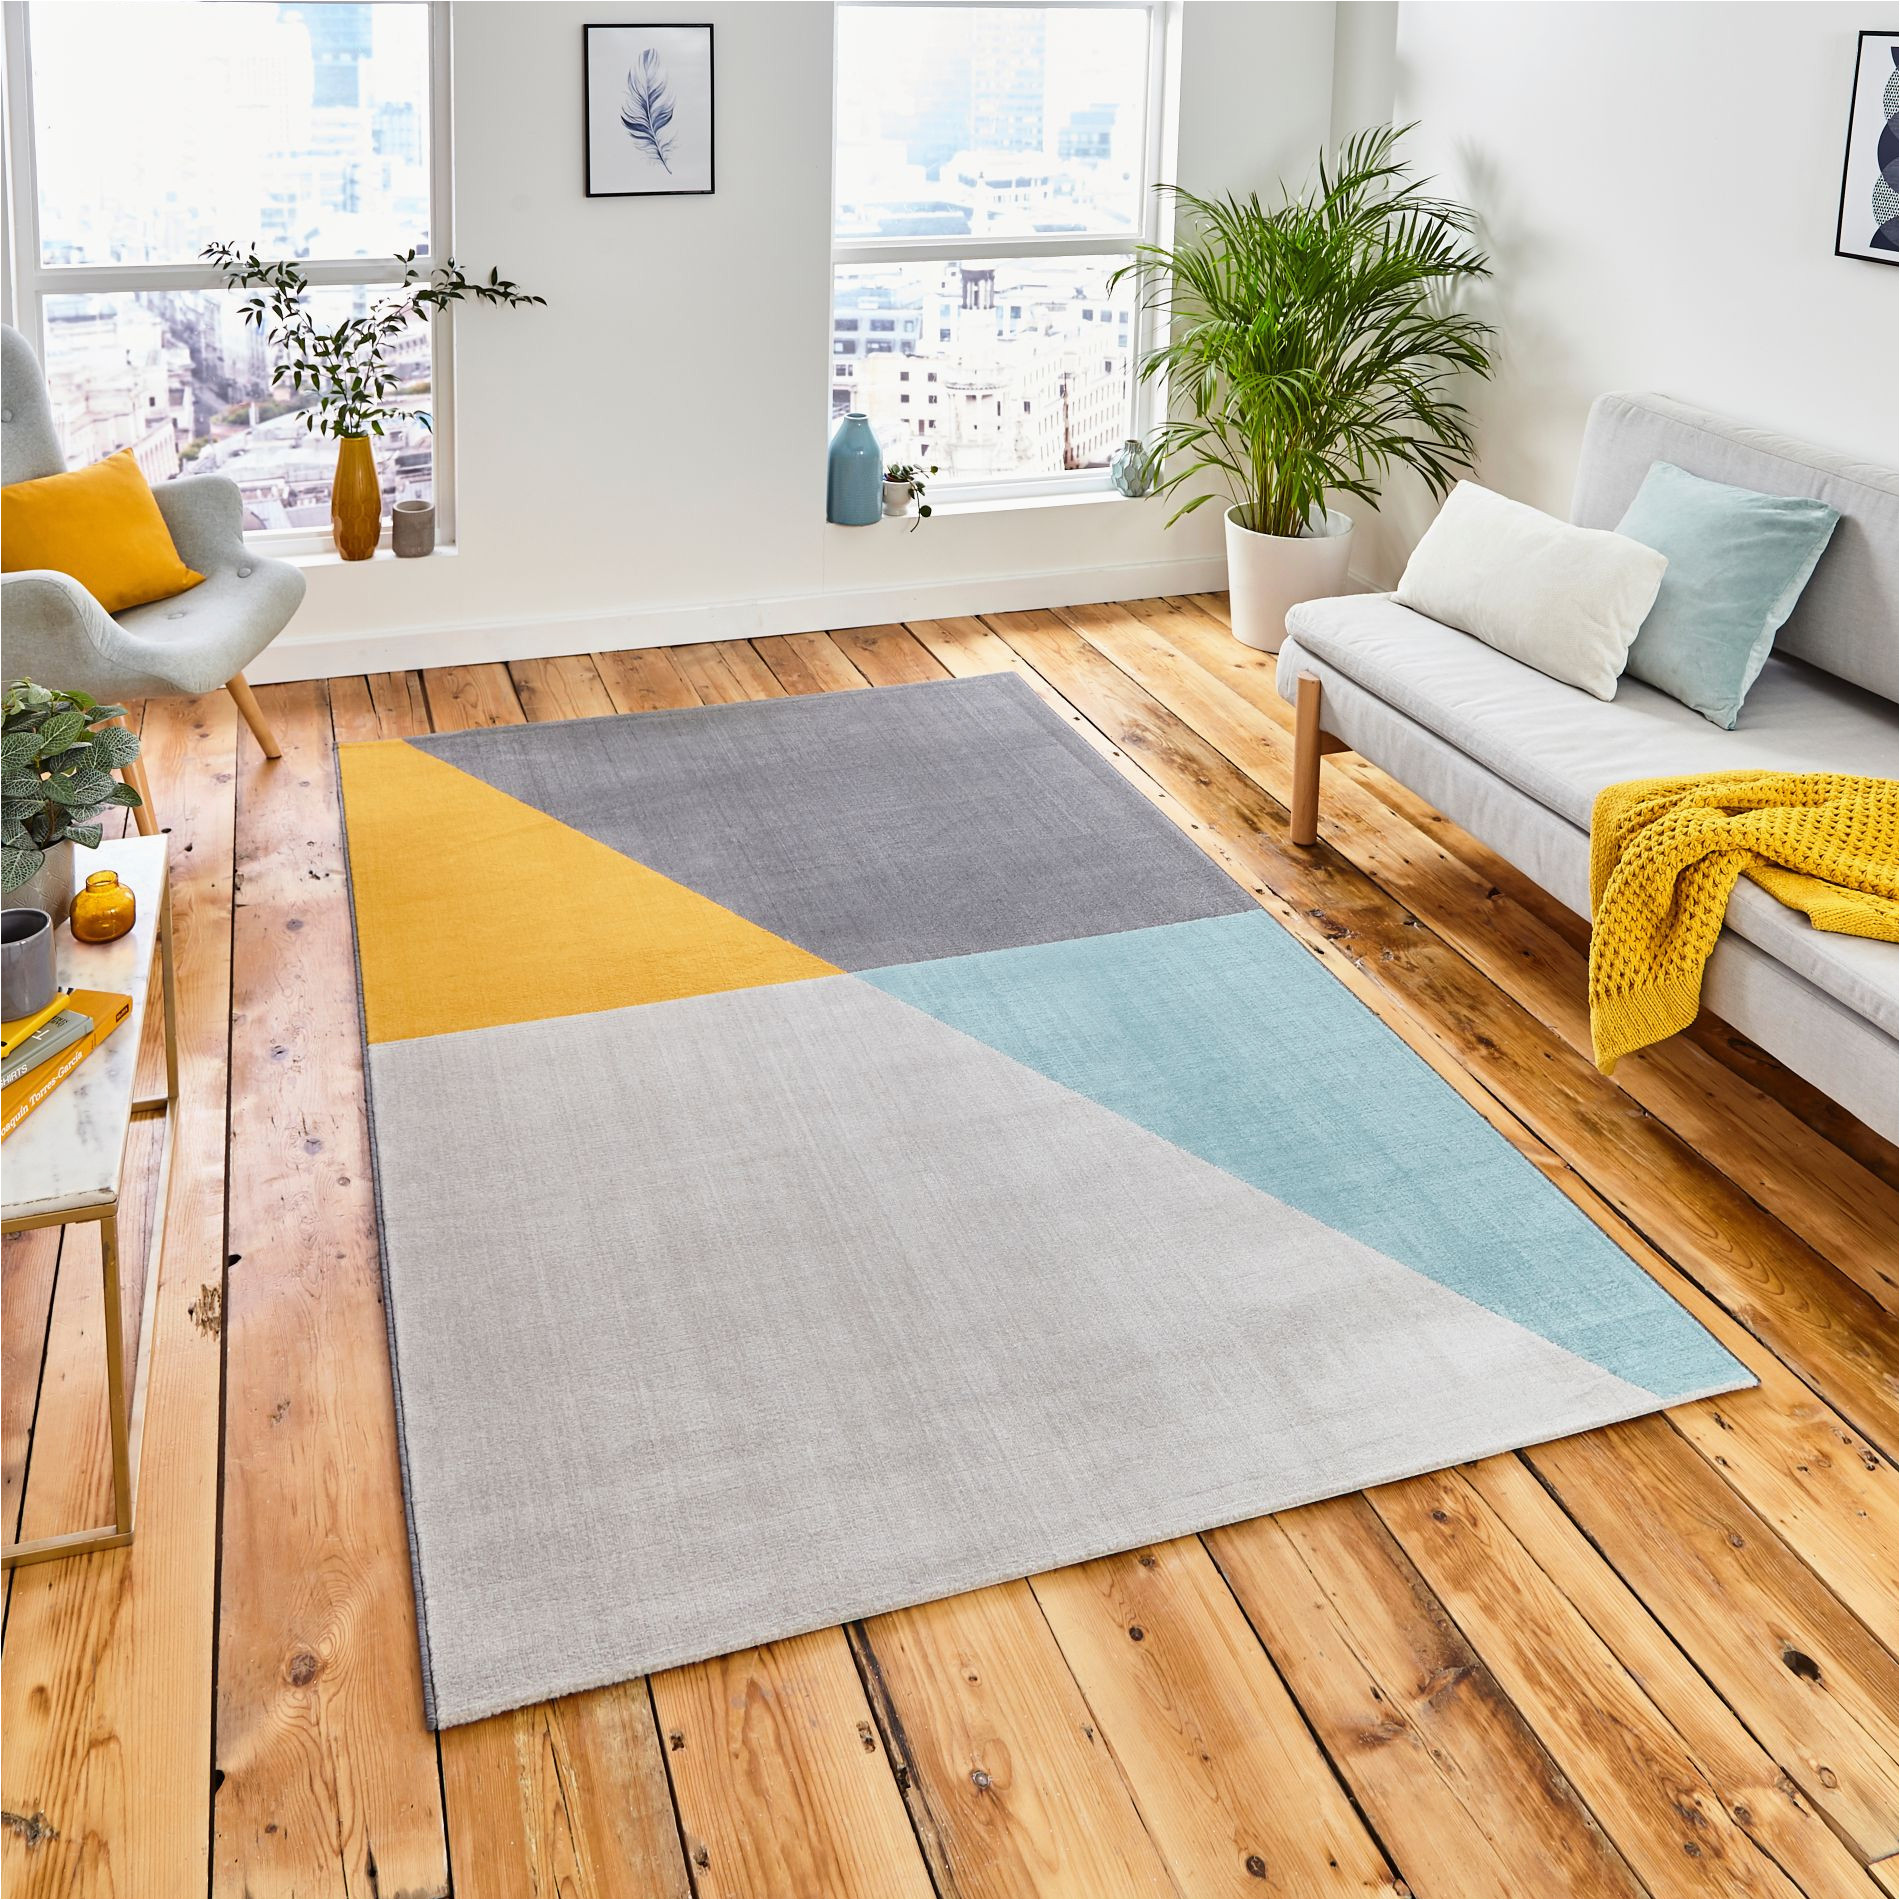 Blue Grey and Yellow Rug Vancouver 18487 Grey Blue Yellow Rugs